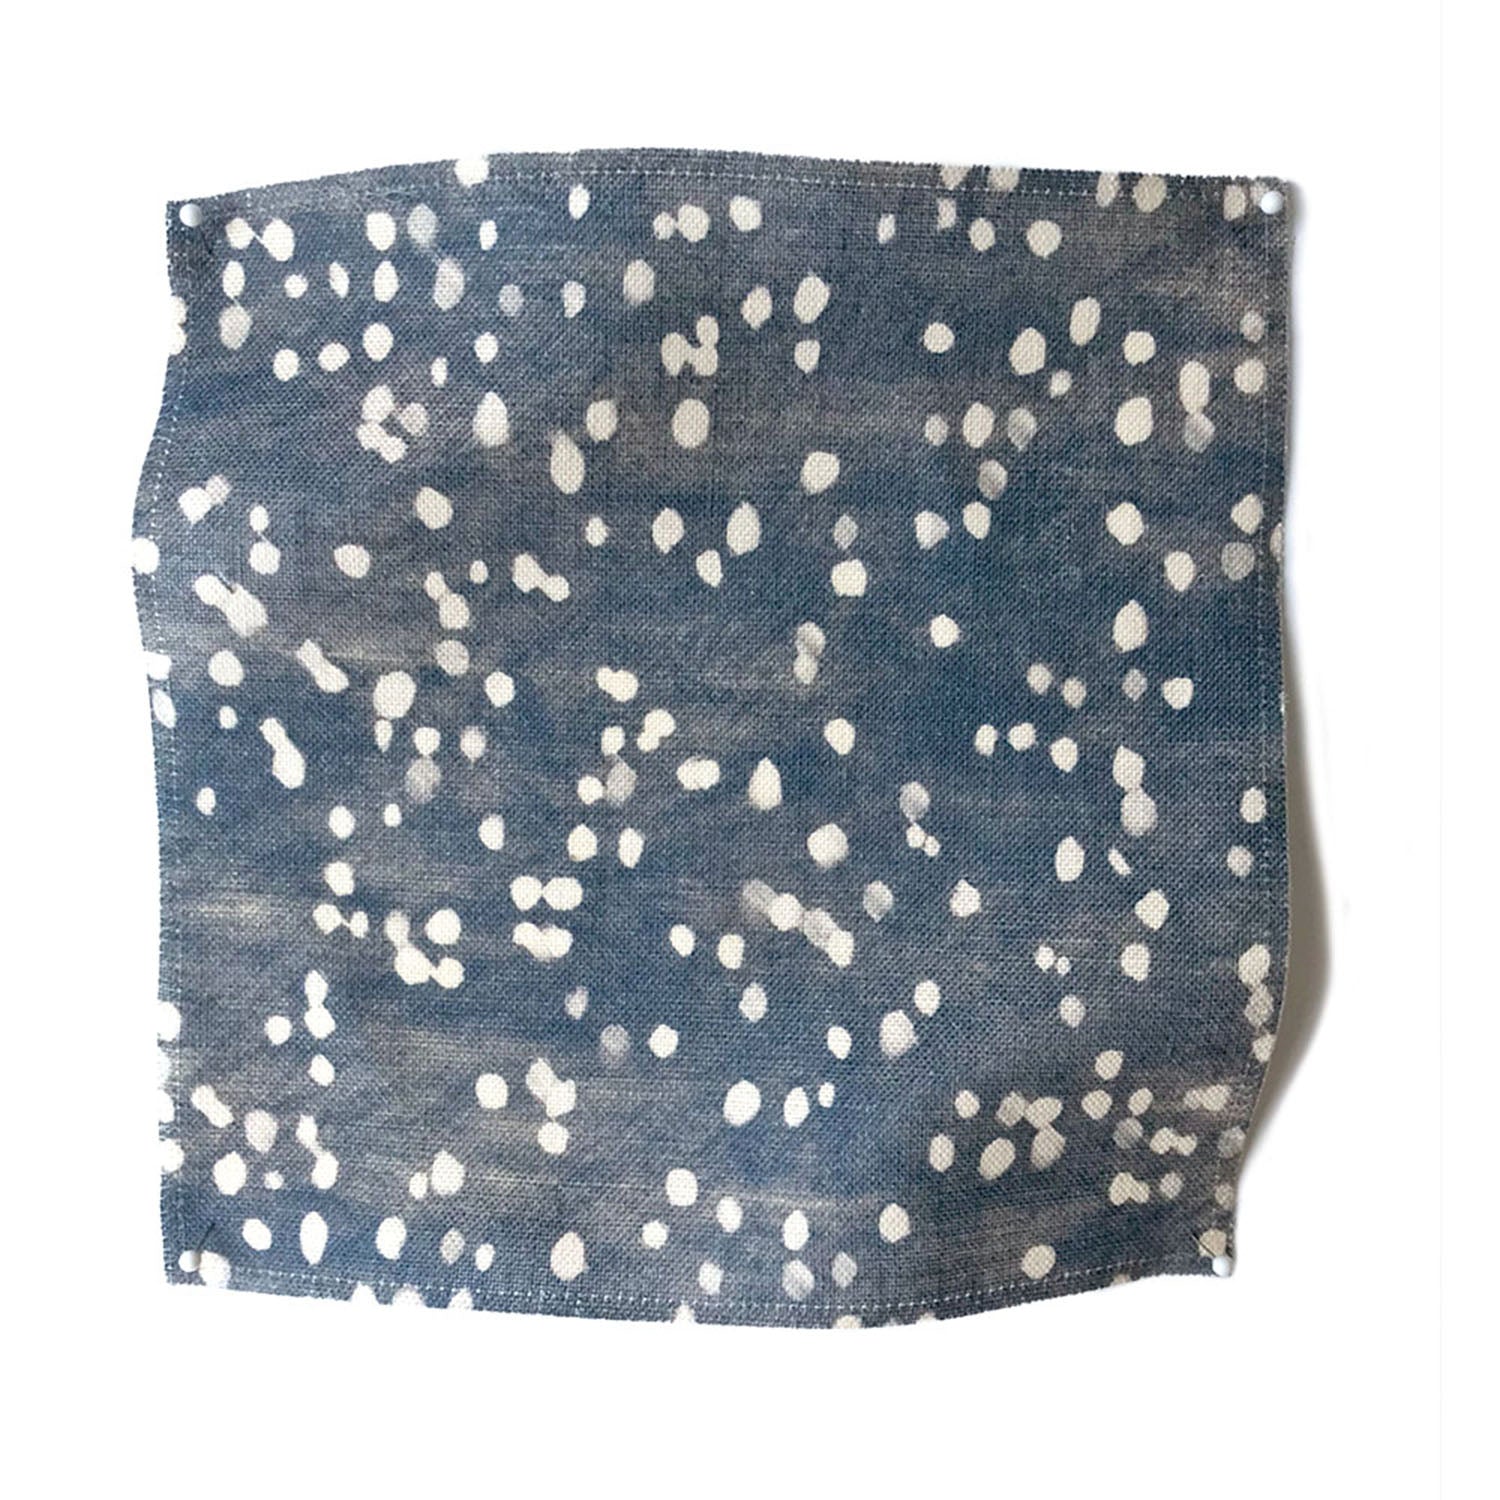 Square fabric swatch in an abstract dotted pattern in white on a mottled denim field.